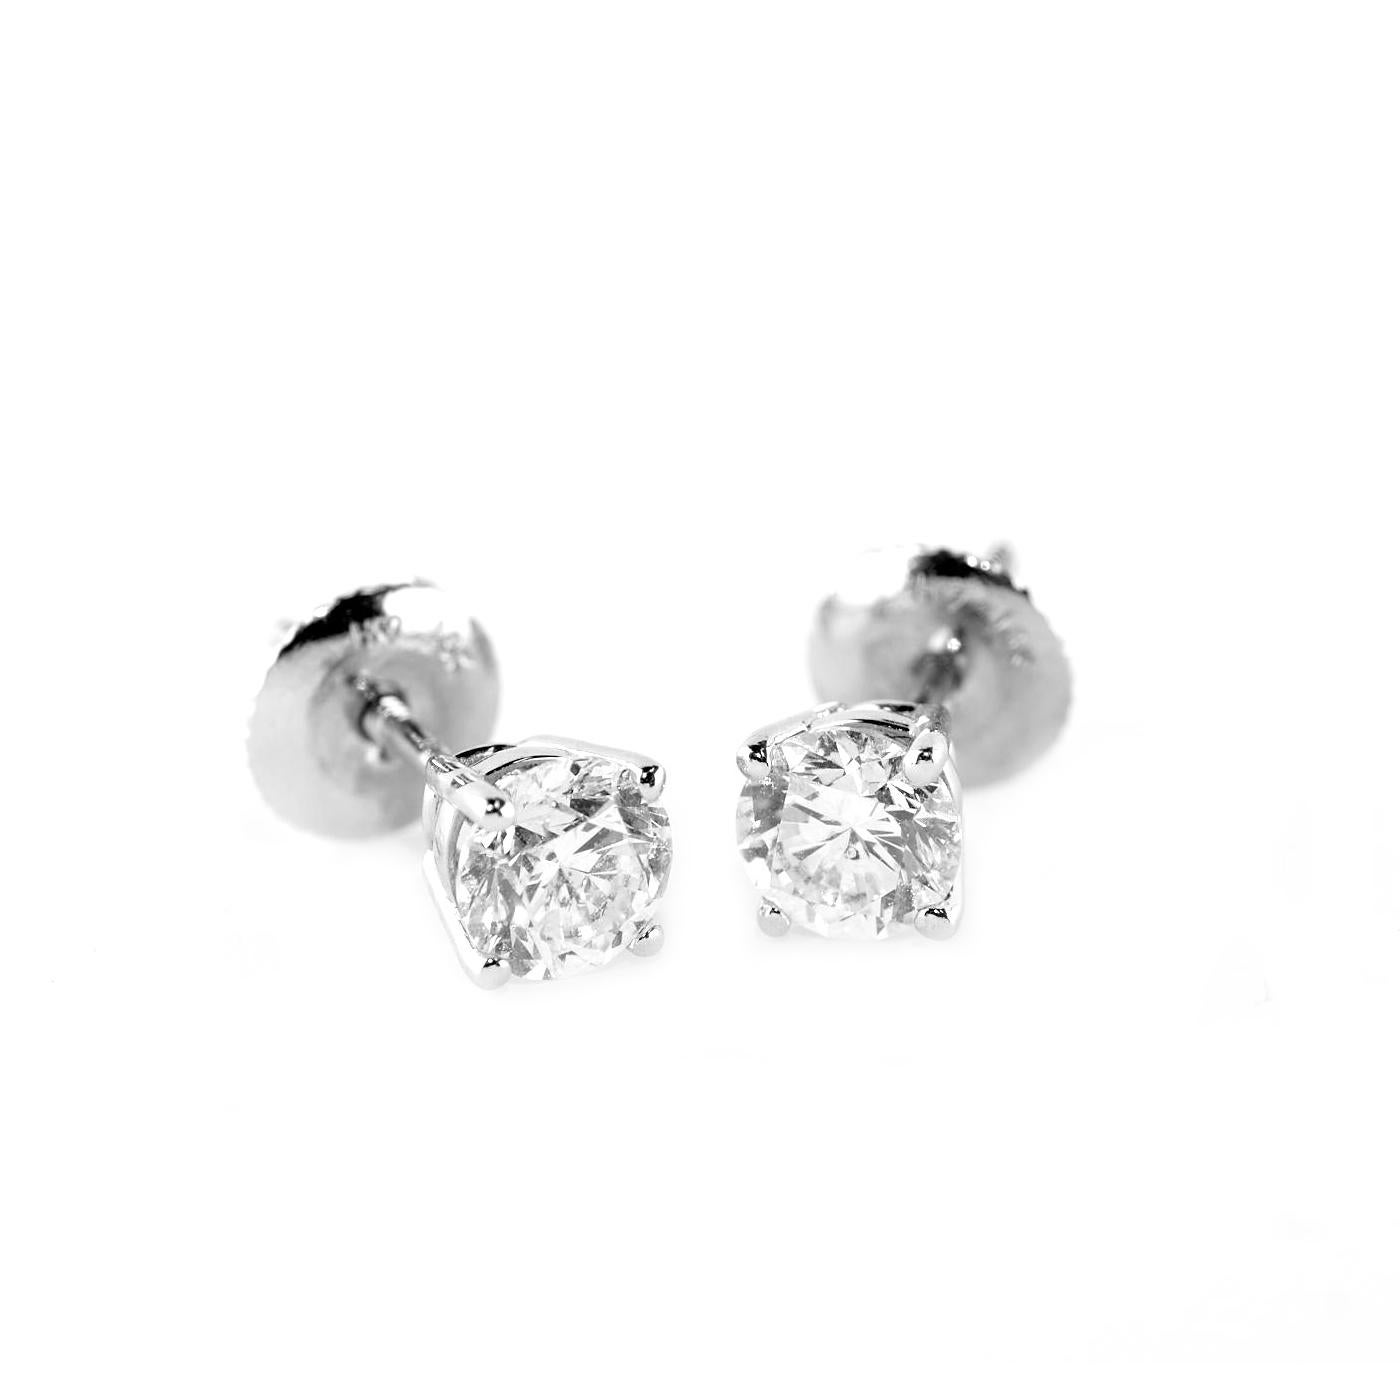 These Gorgeous 4 Prongs Martini Setting Diamond stud earrings offer beauty equaled only to her own. This fashionable and classic matching pair of Martini Setting studs features round-cut genuine diamonds. with a measurement of 5.19mm - 5.07mm and